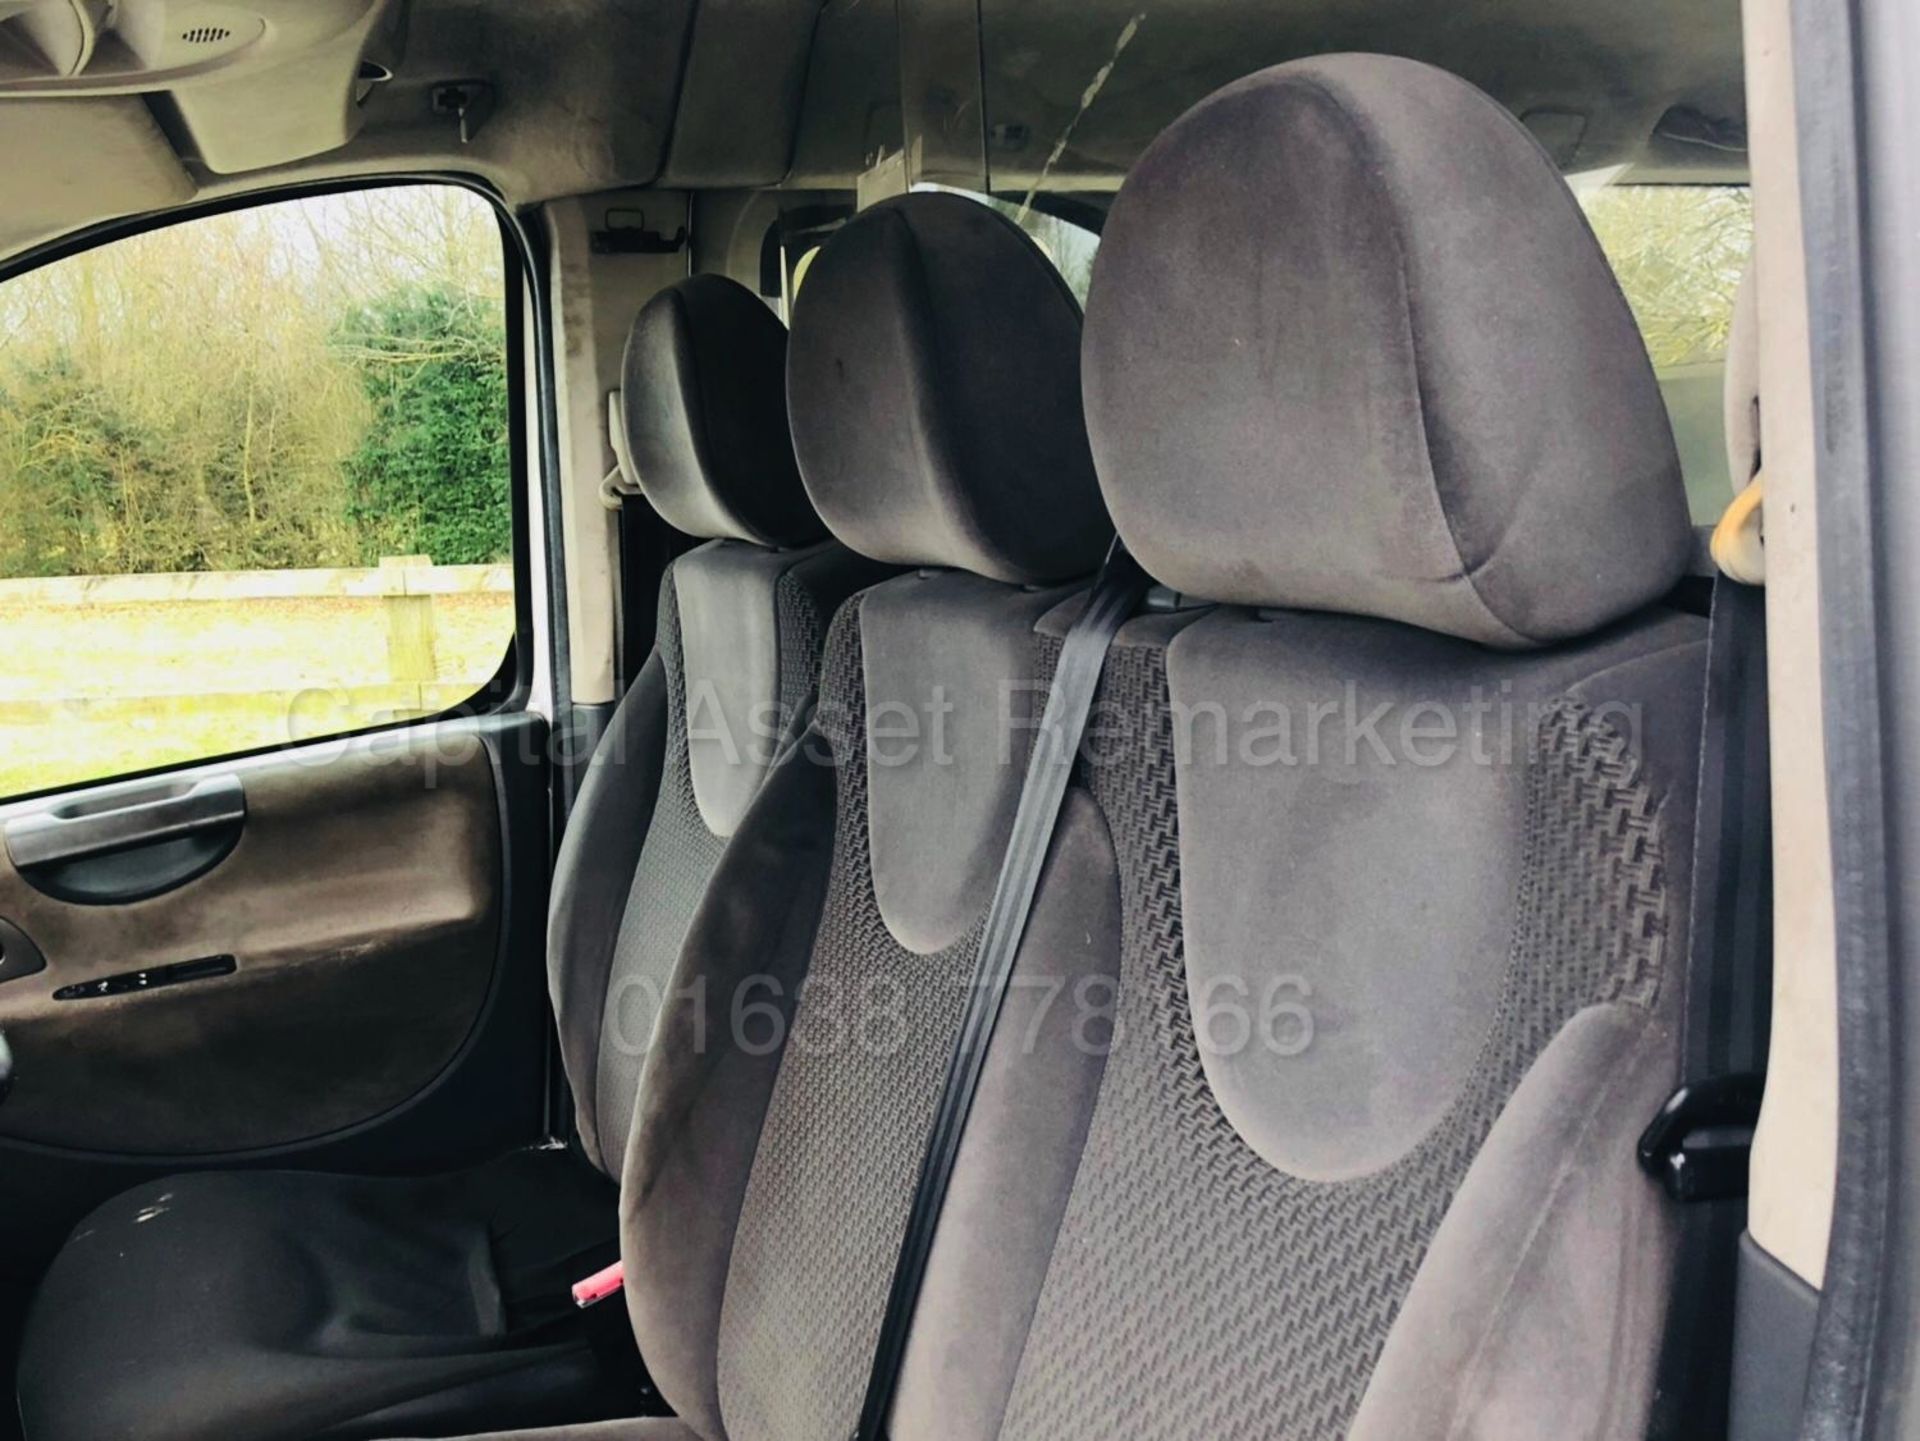 (On Sale) CITROEN DISPATCH LWB '9 SEATER BUS' (2009 - 09 REG) '2.0 HDI -120 BHP - 6 SPEED' *AIR CON* - Image 12 of 20